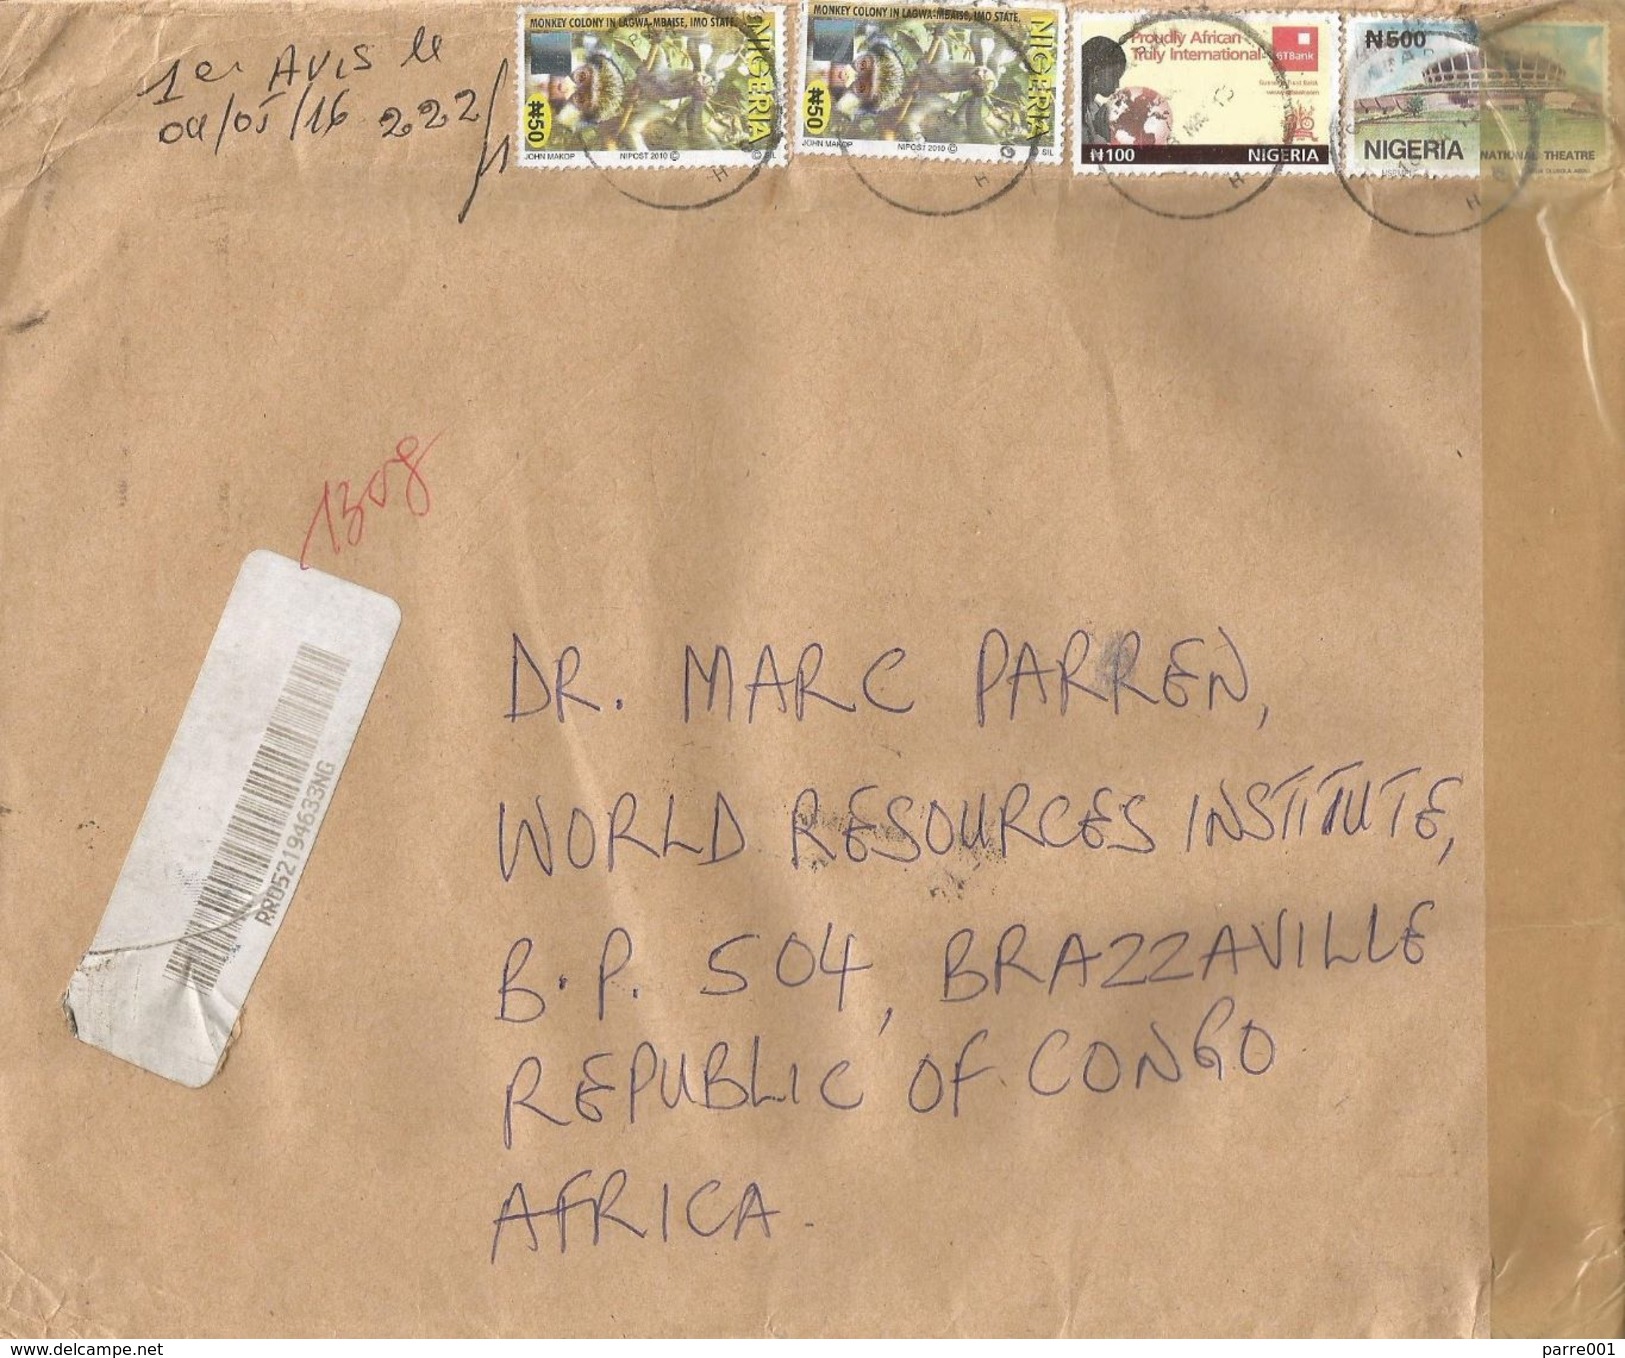 Nigeria 2016 Calabar Ape Monkey Bank National Theater N500 Michel D546 (rare) Barcoded Registered Cover - Nigeria (1961-...)